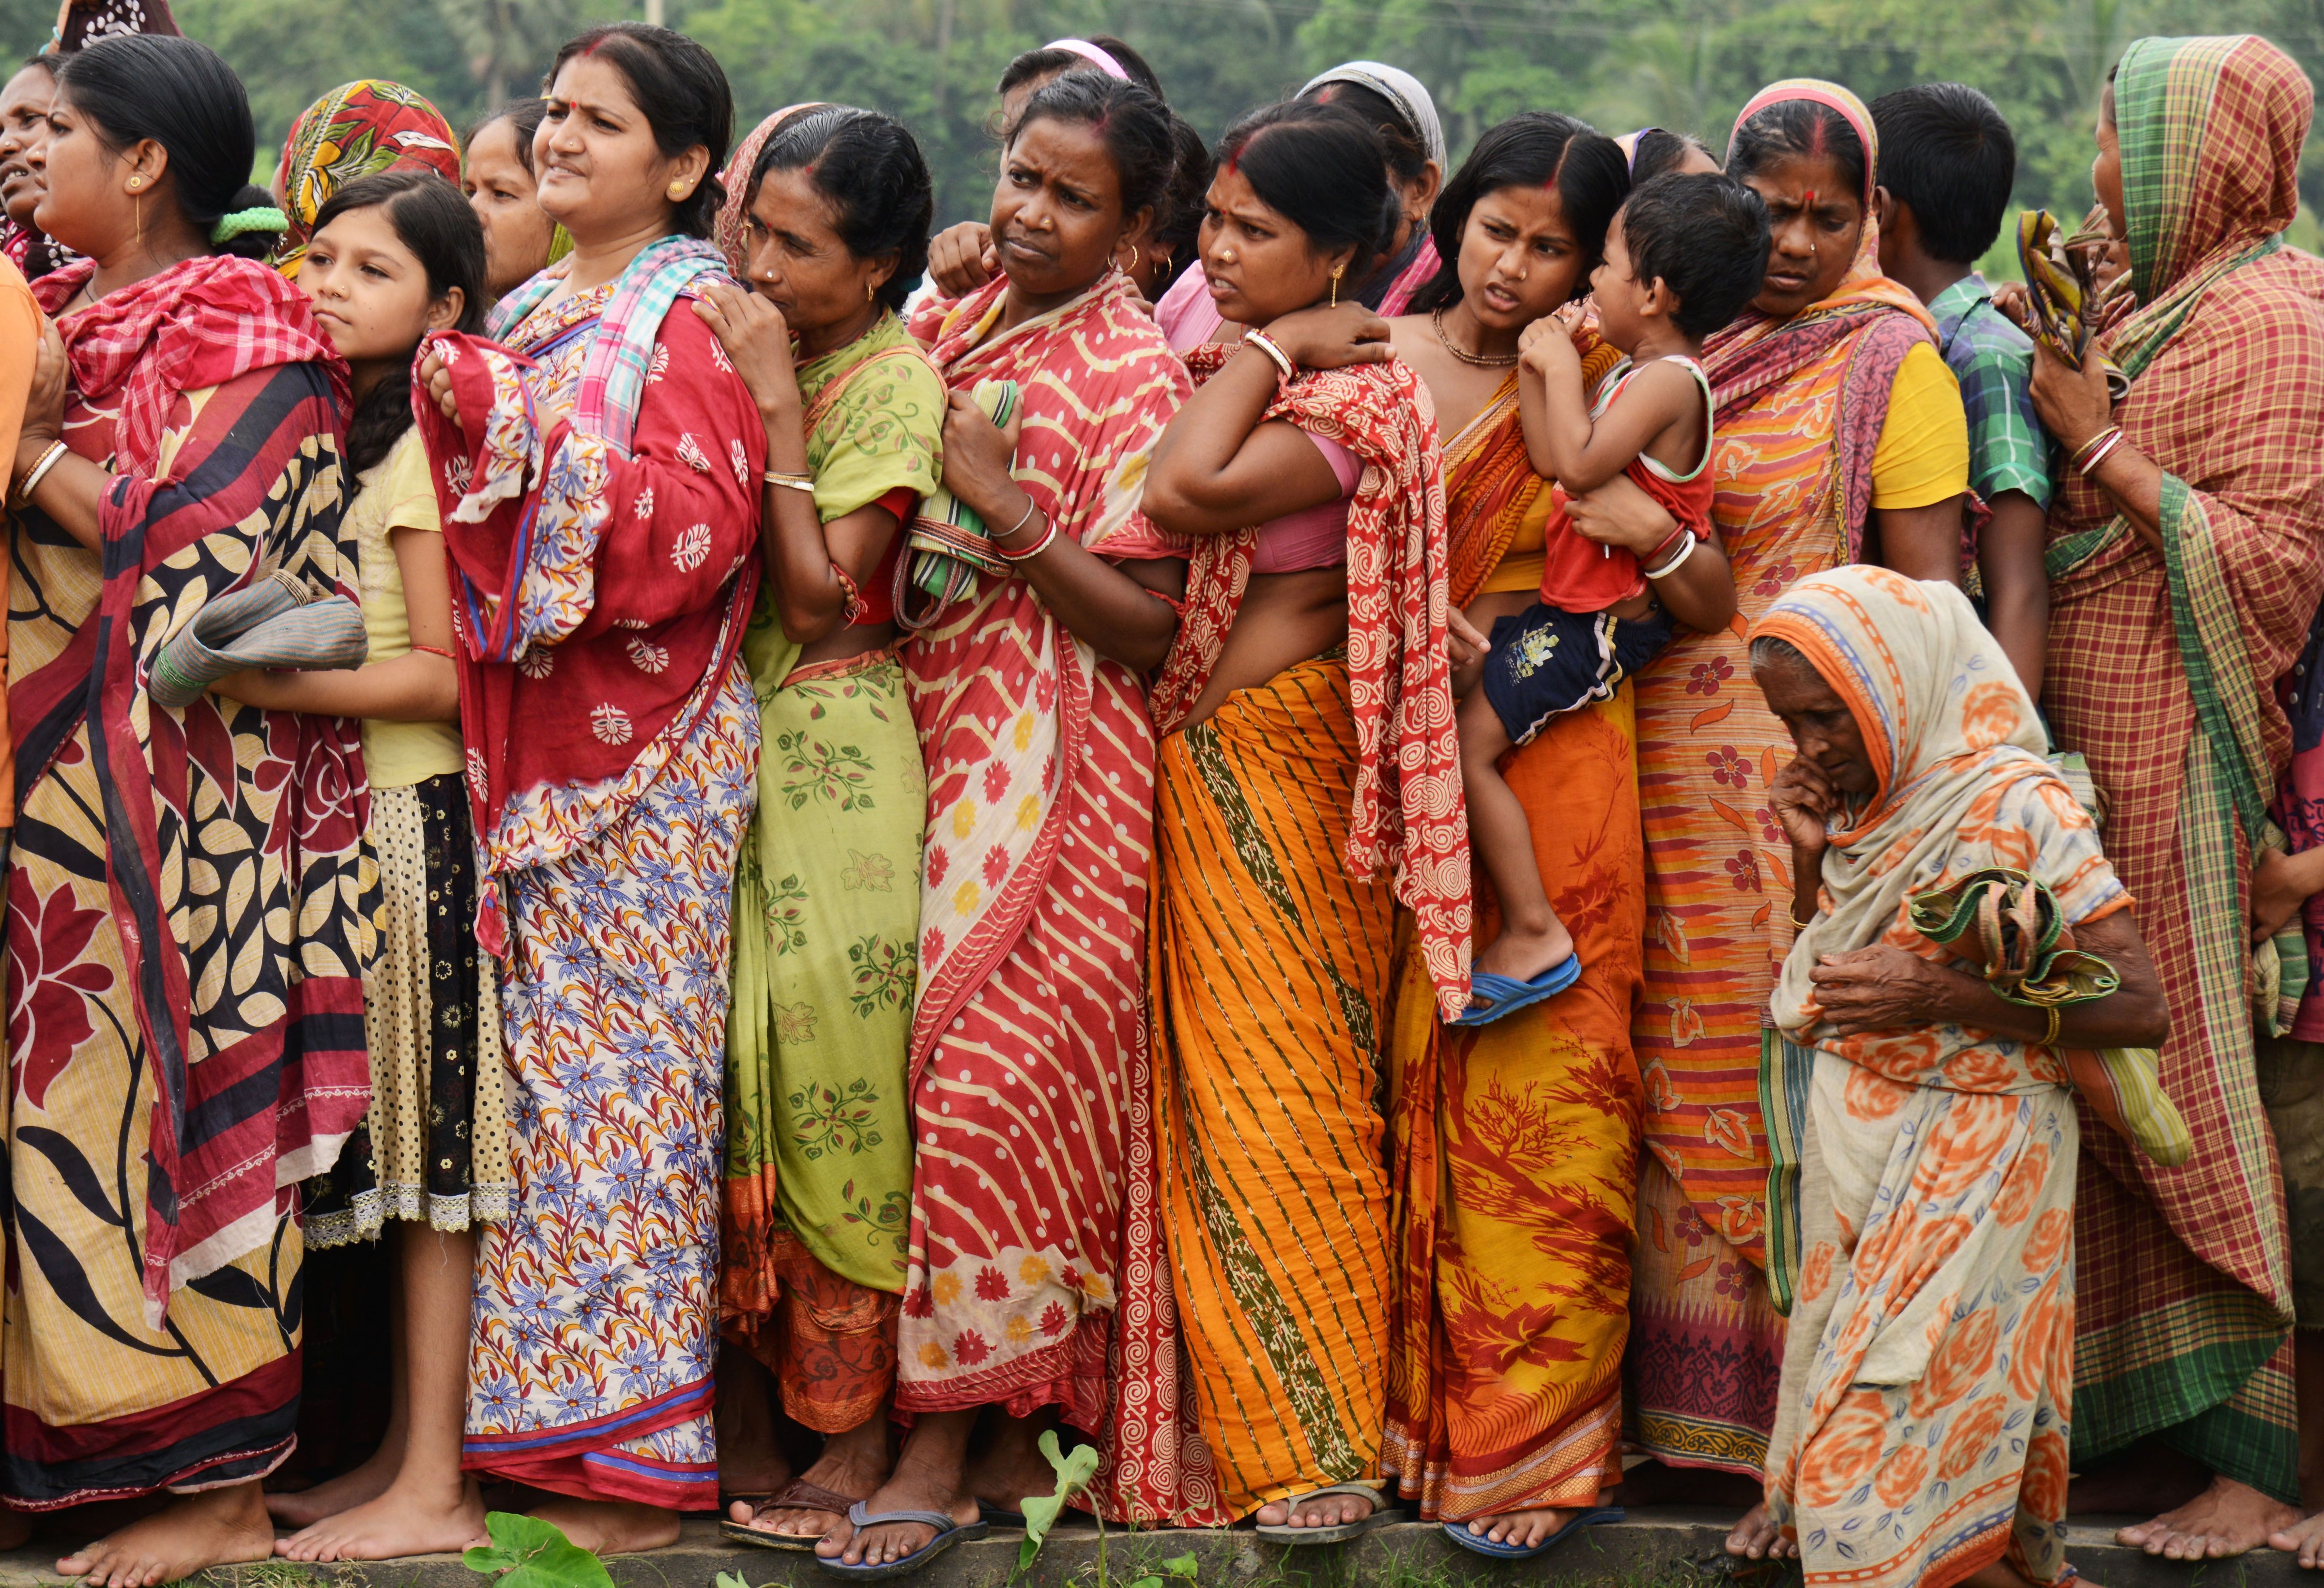 Indian flood victims wait in a queue to collect relief materials in Chitnan village, around 60 km West of Kolkata, on July 28, 2017. (Dibyangshu Sarkar—AFP/Getty Images)